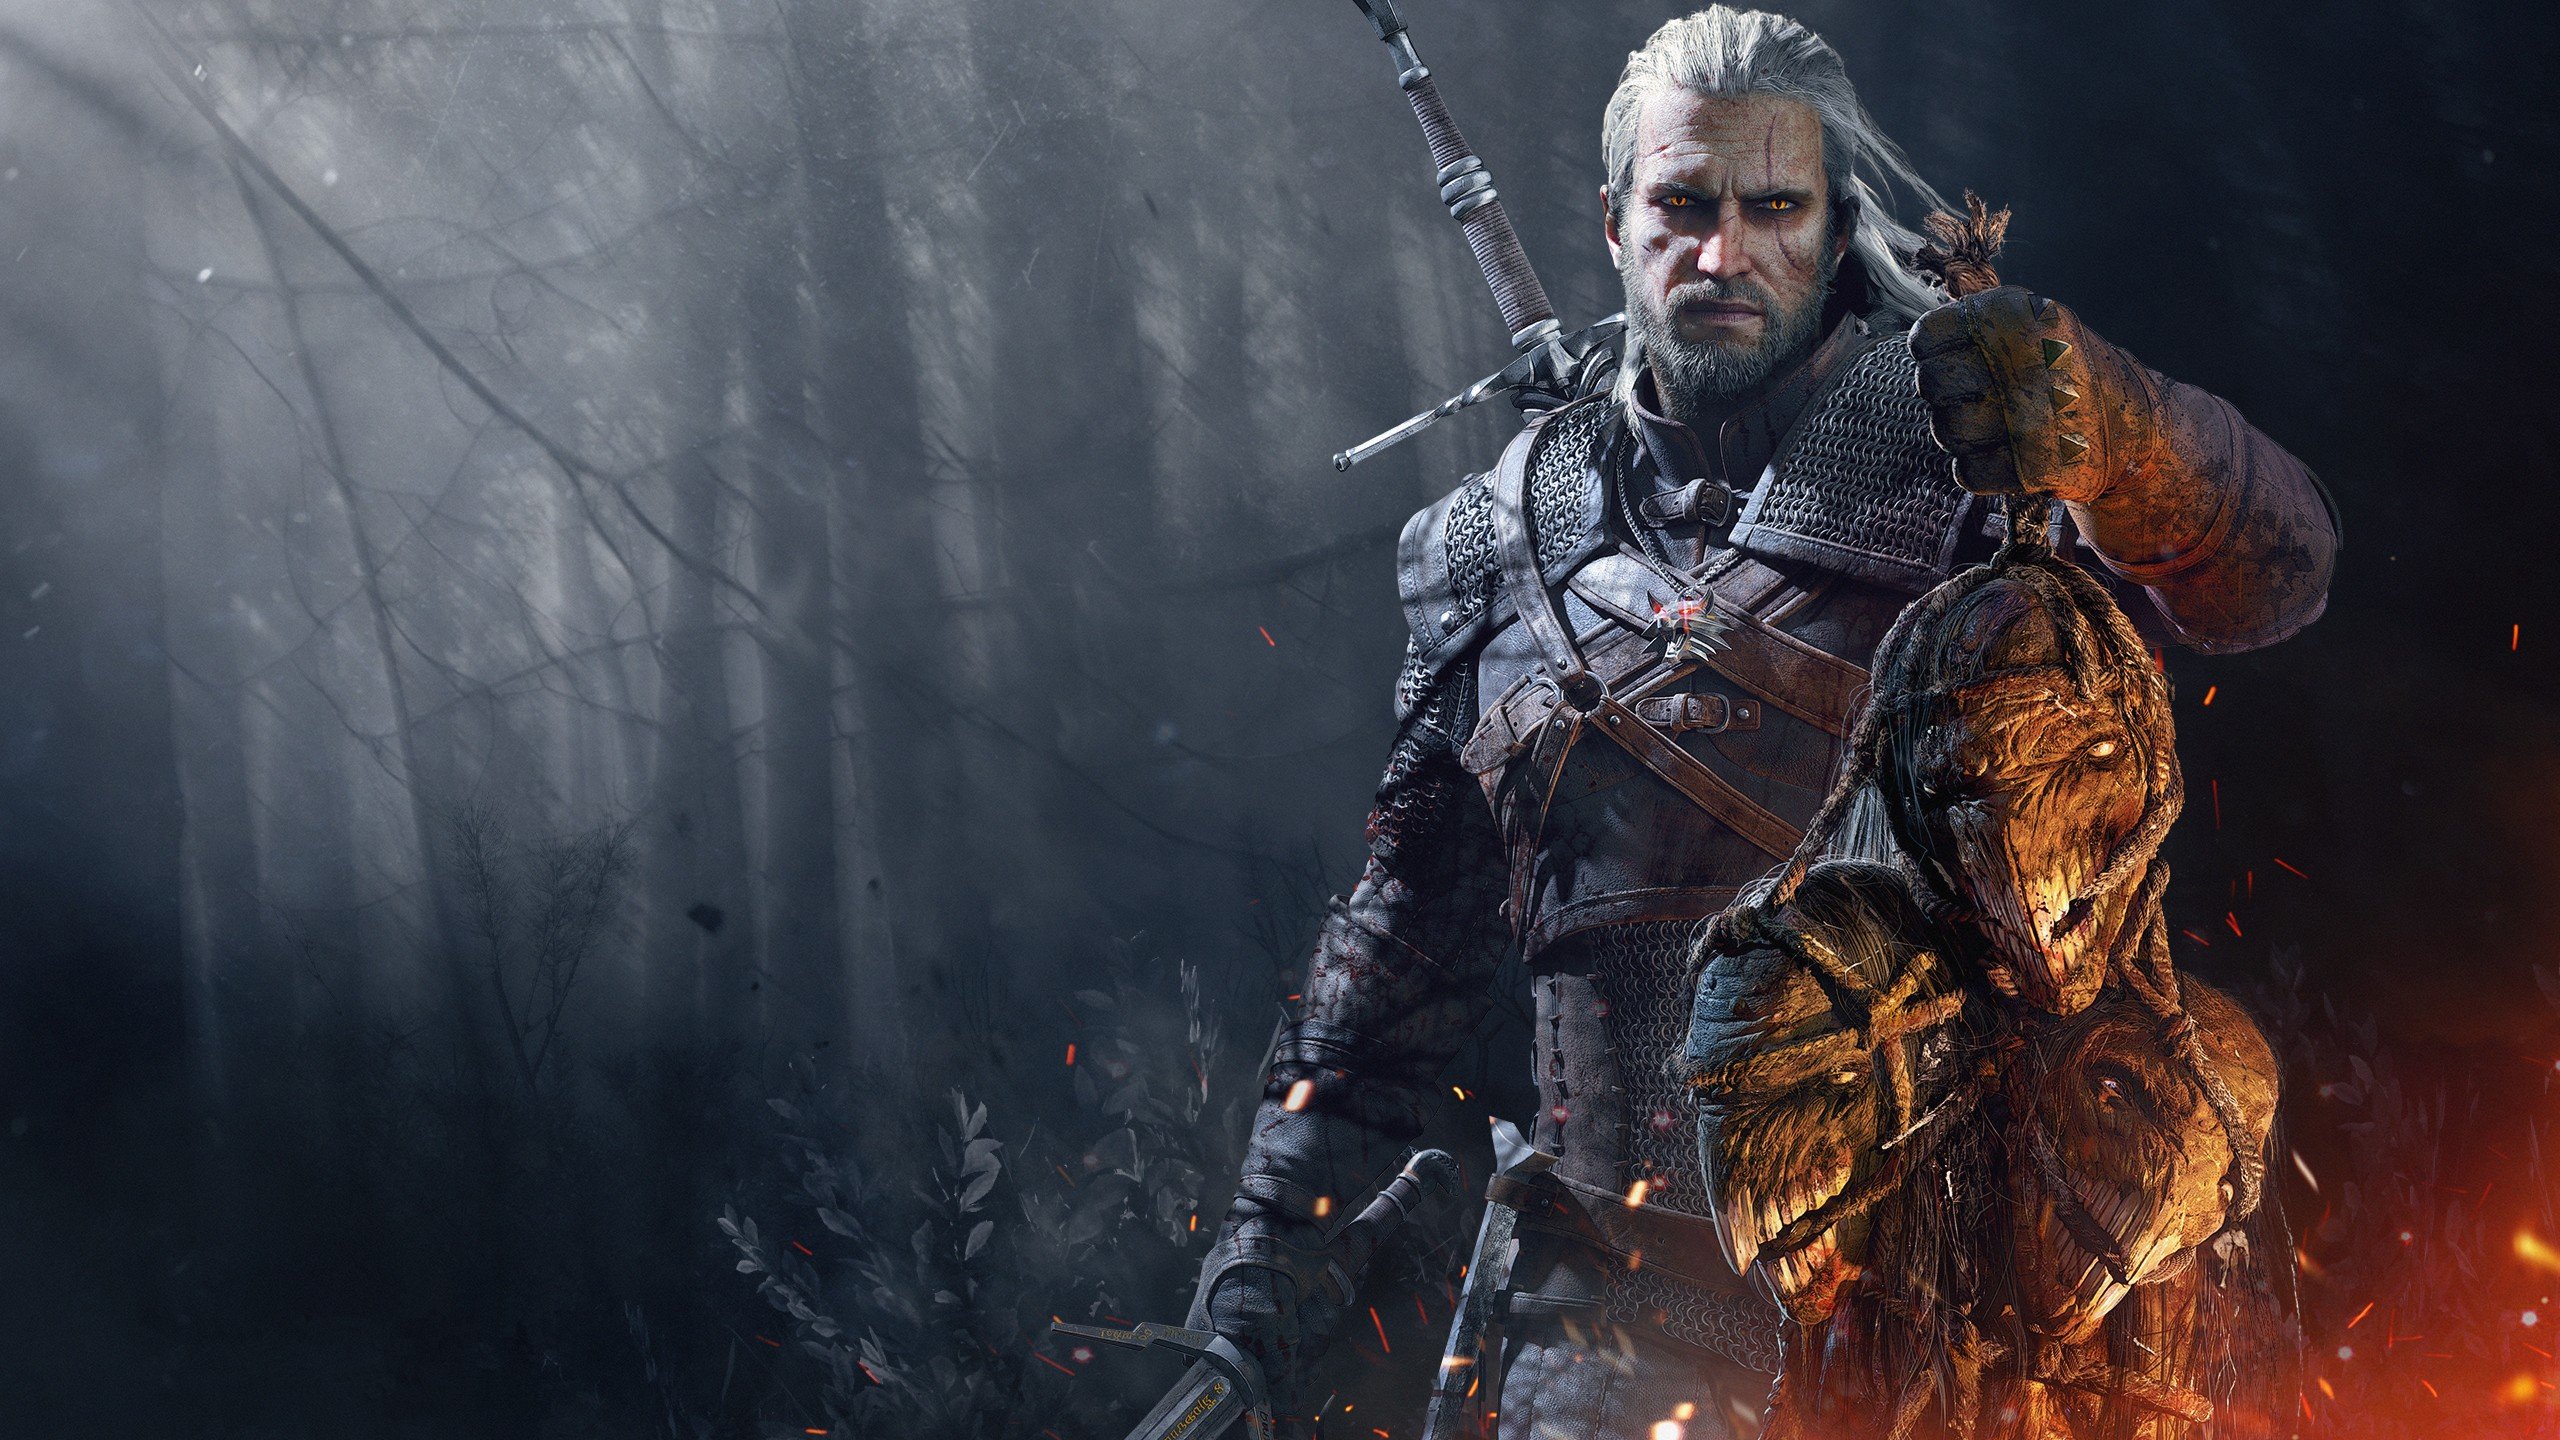 Geralt of Rivia, The Witcher, The Witcher 3: Wild Hunt, Video games ...
